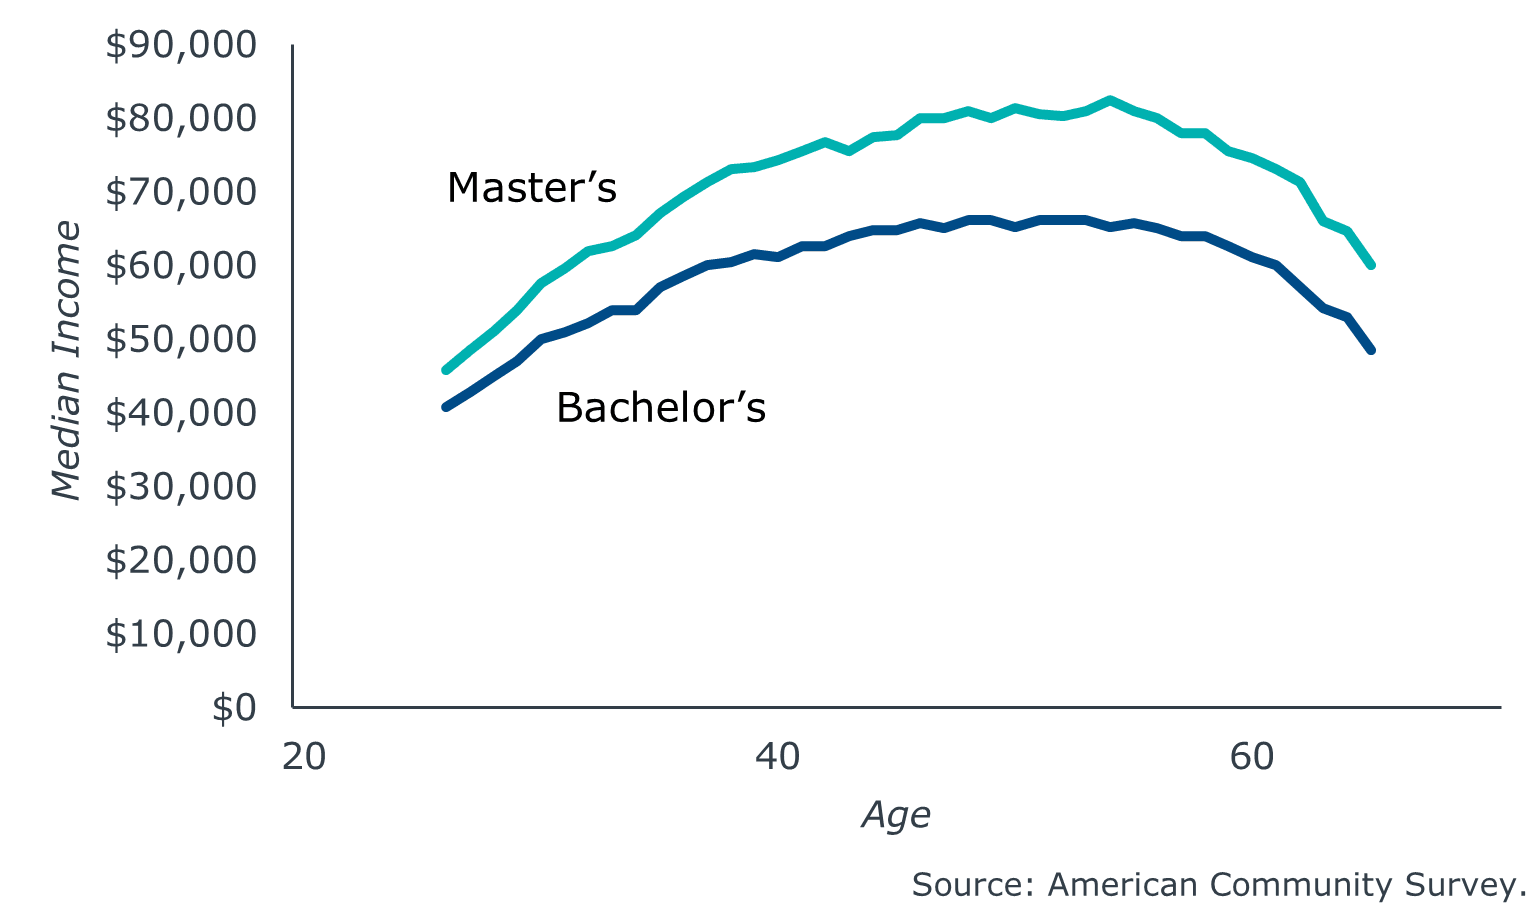 Chart on Median Income by Age and Education Level - Master's degree vs. bachelor's degree